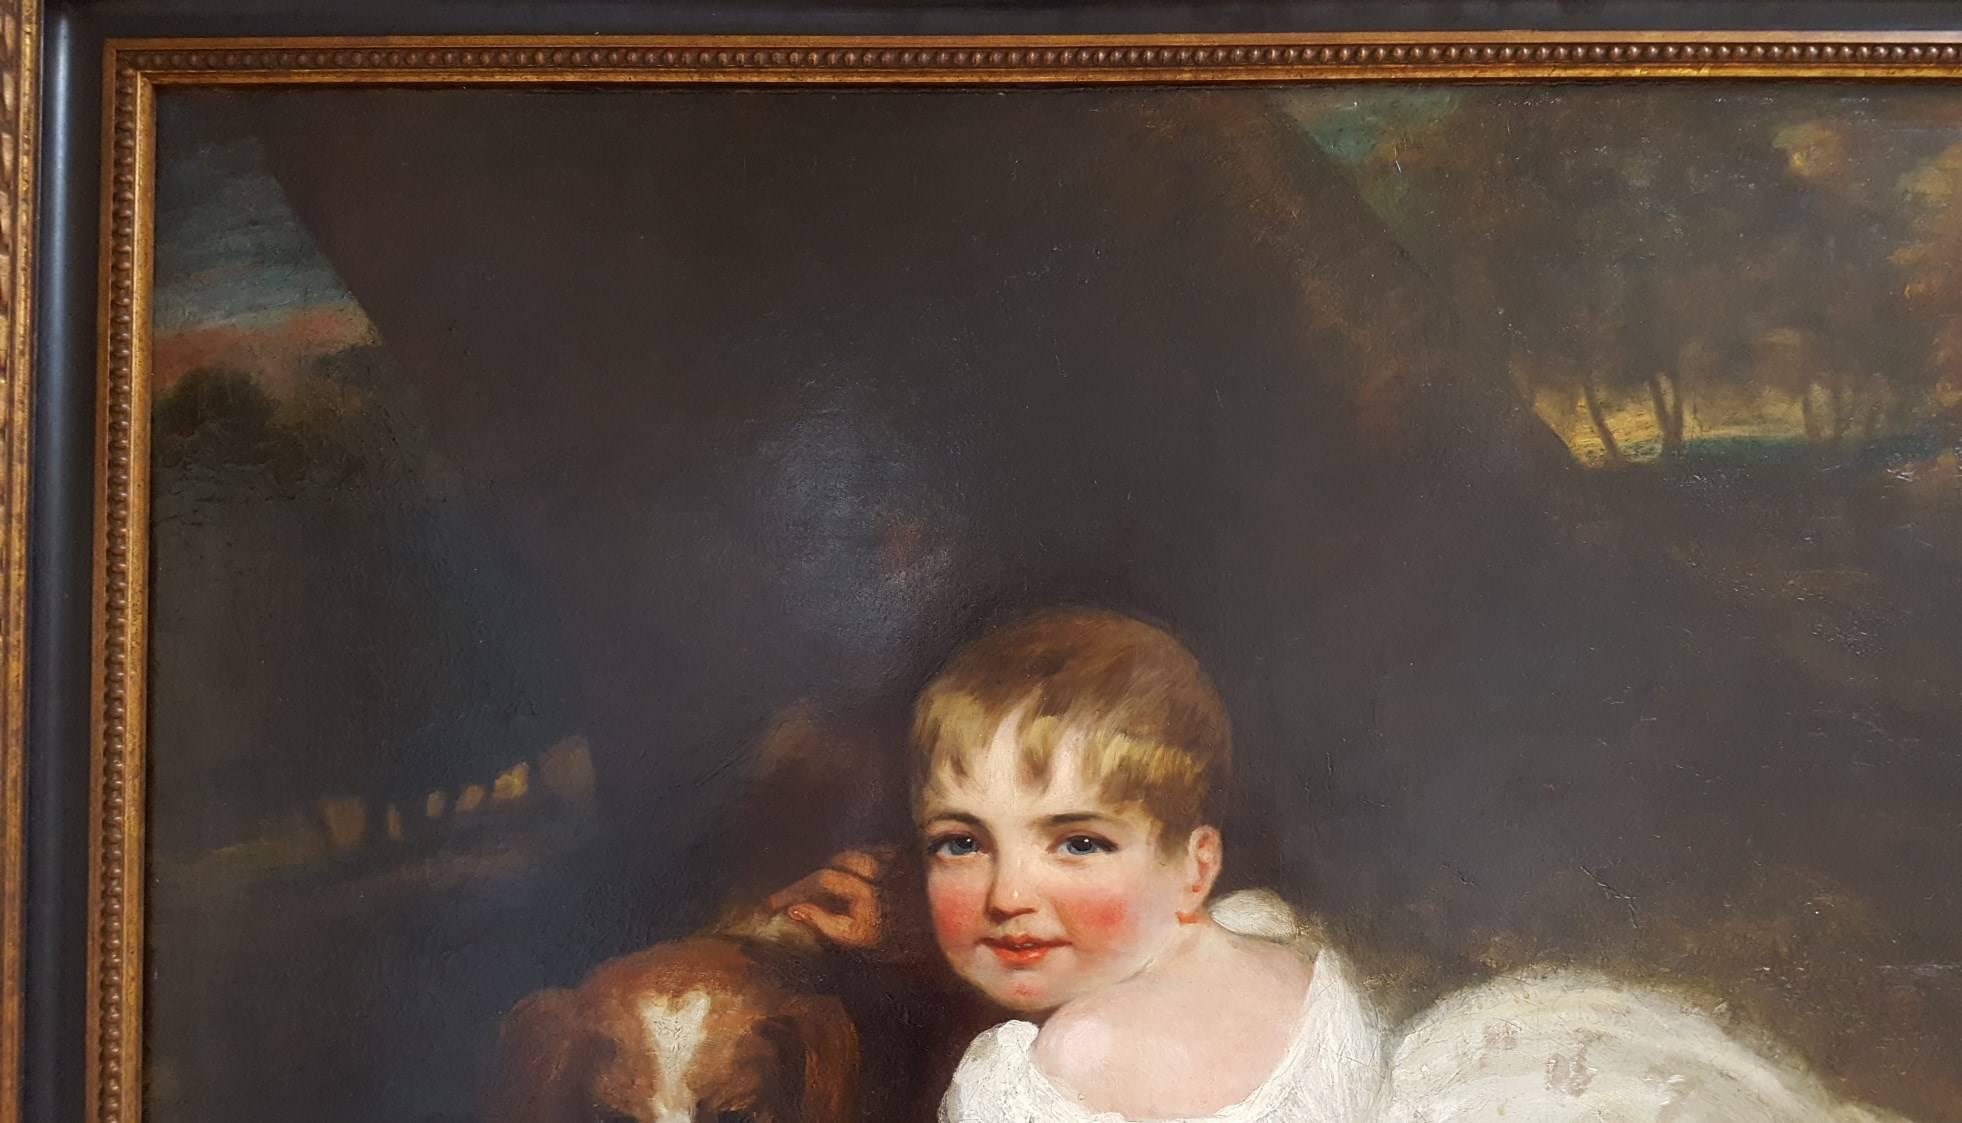 An original oil on canvas attributed to / studio of English artist Joshua Reynolds (1723-1792) titled 